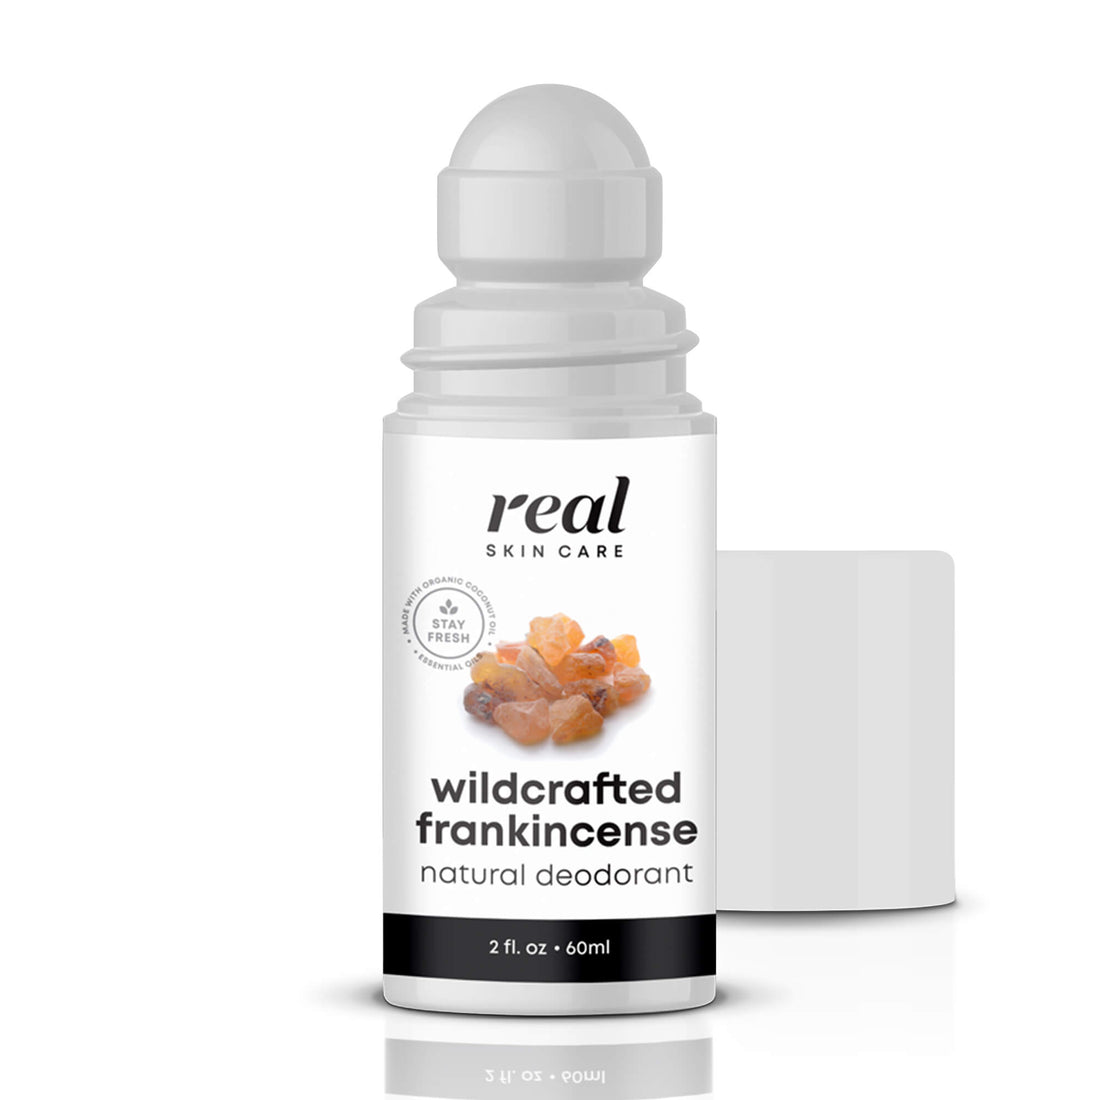 Real Skin Care Best Natural Deodorant Wildcrafted Frankincense